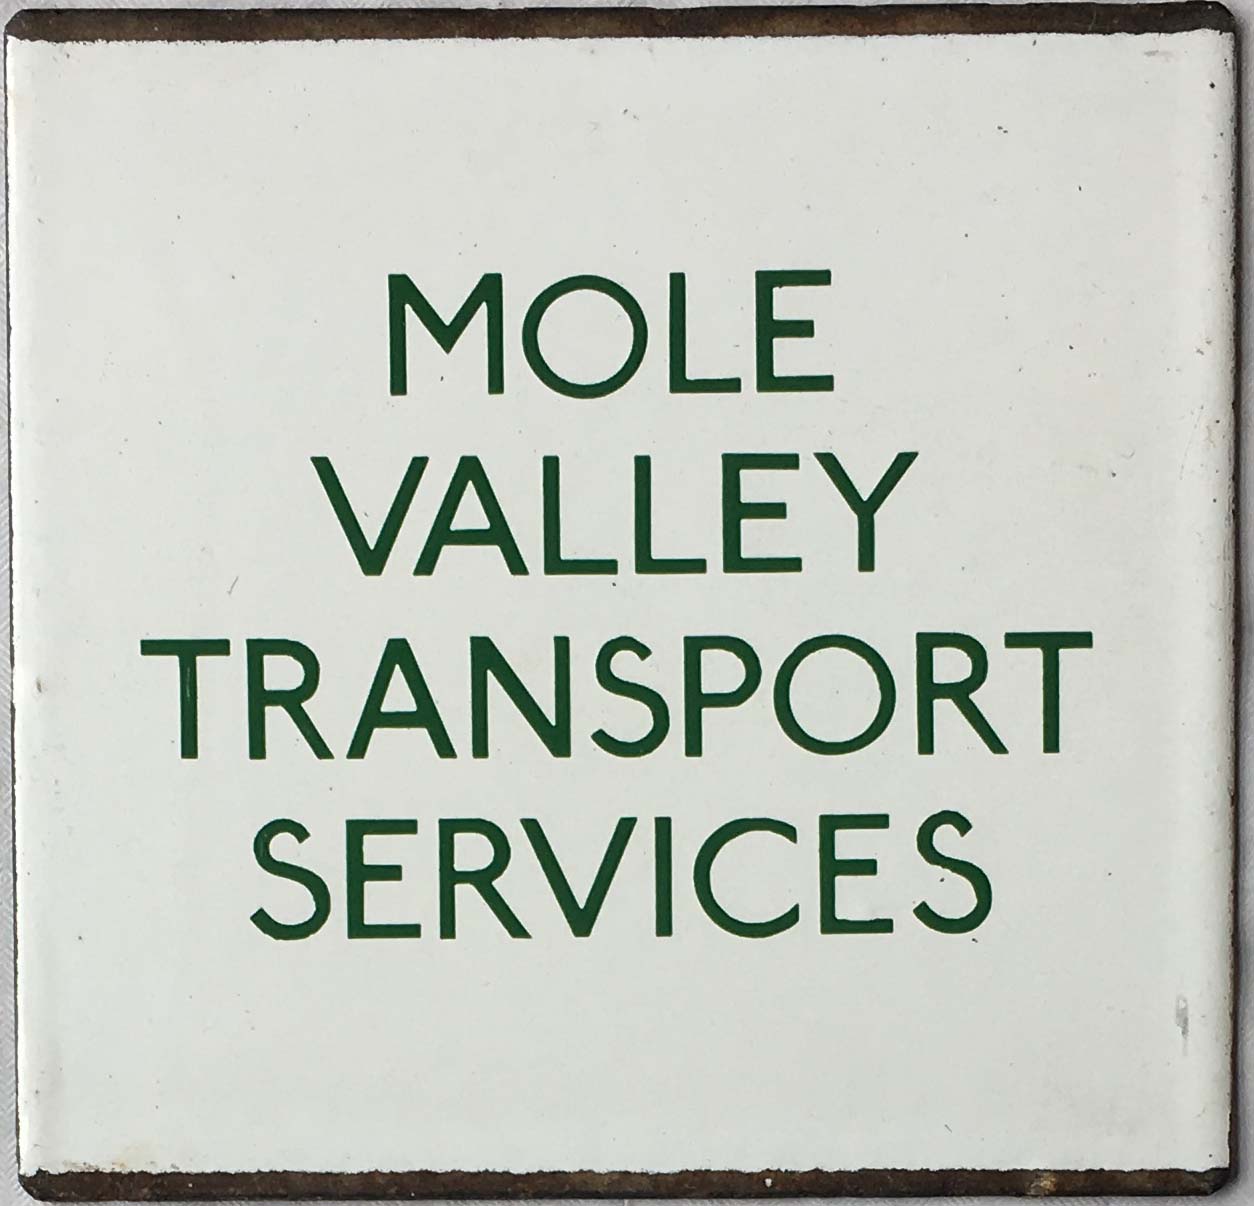 London Transport enamel bus stop E-PLATE for Mole Valley Transport Services, an independent operator